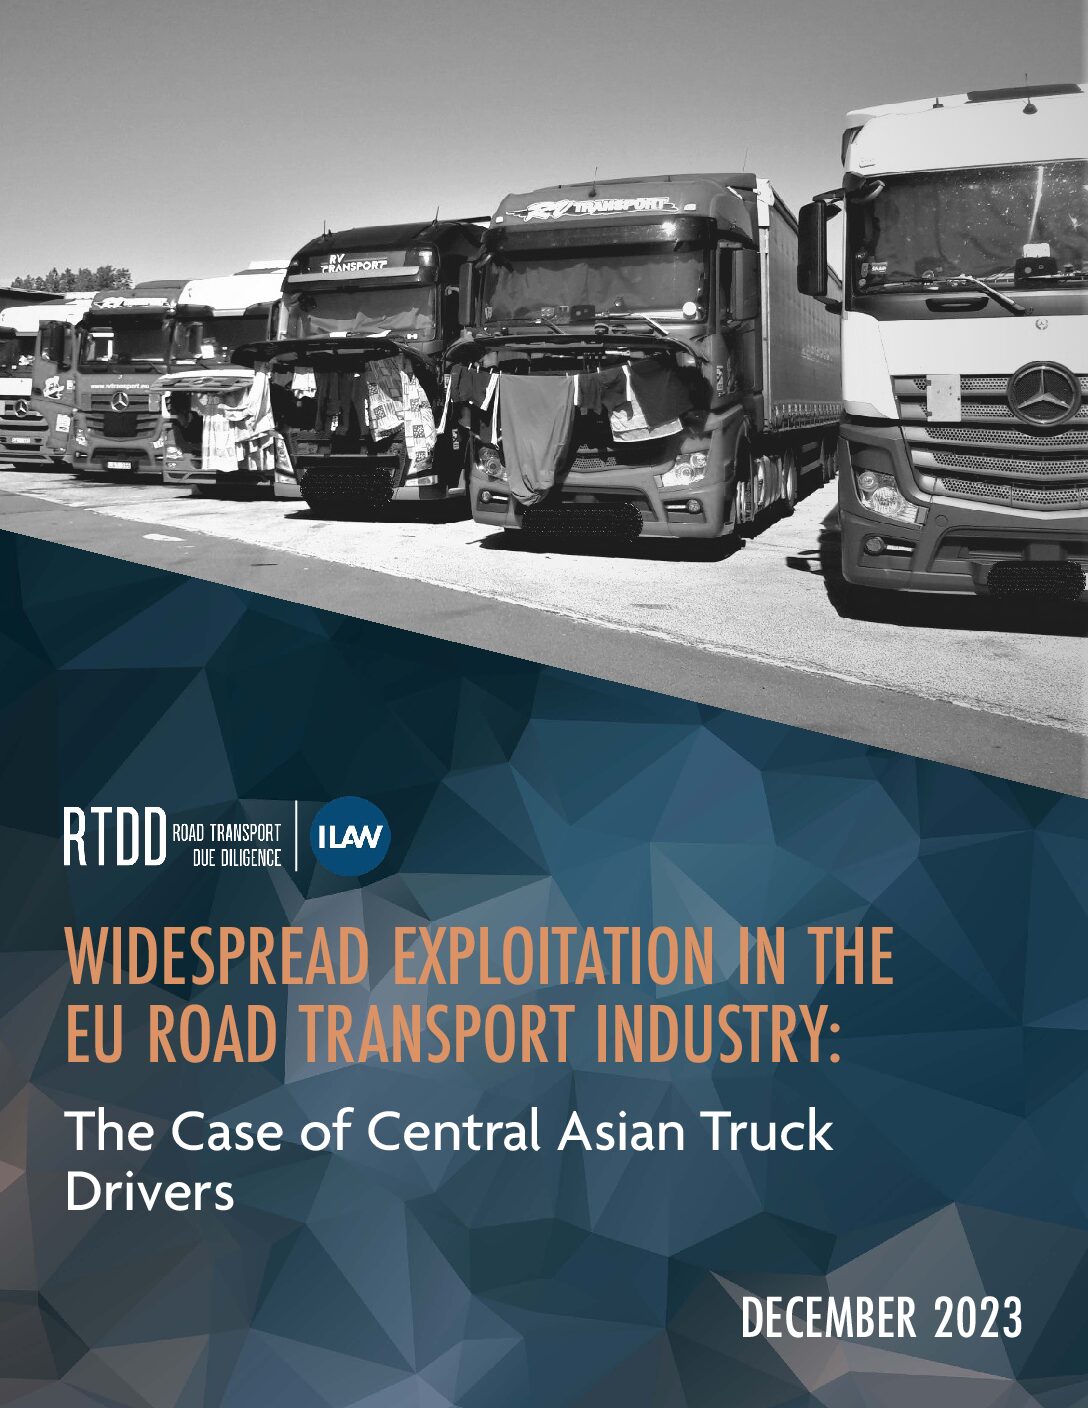 Cover of Widespread Exploitation in the EU Road Transport Industry: The Case of Central Asian Truck Drivers, a report by Road Transport Due Diligence and the ILAW Network, a project of the Solidarity Center.